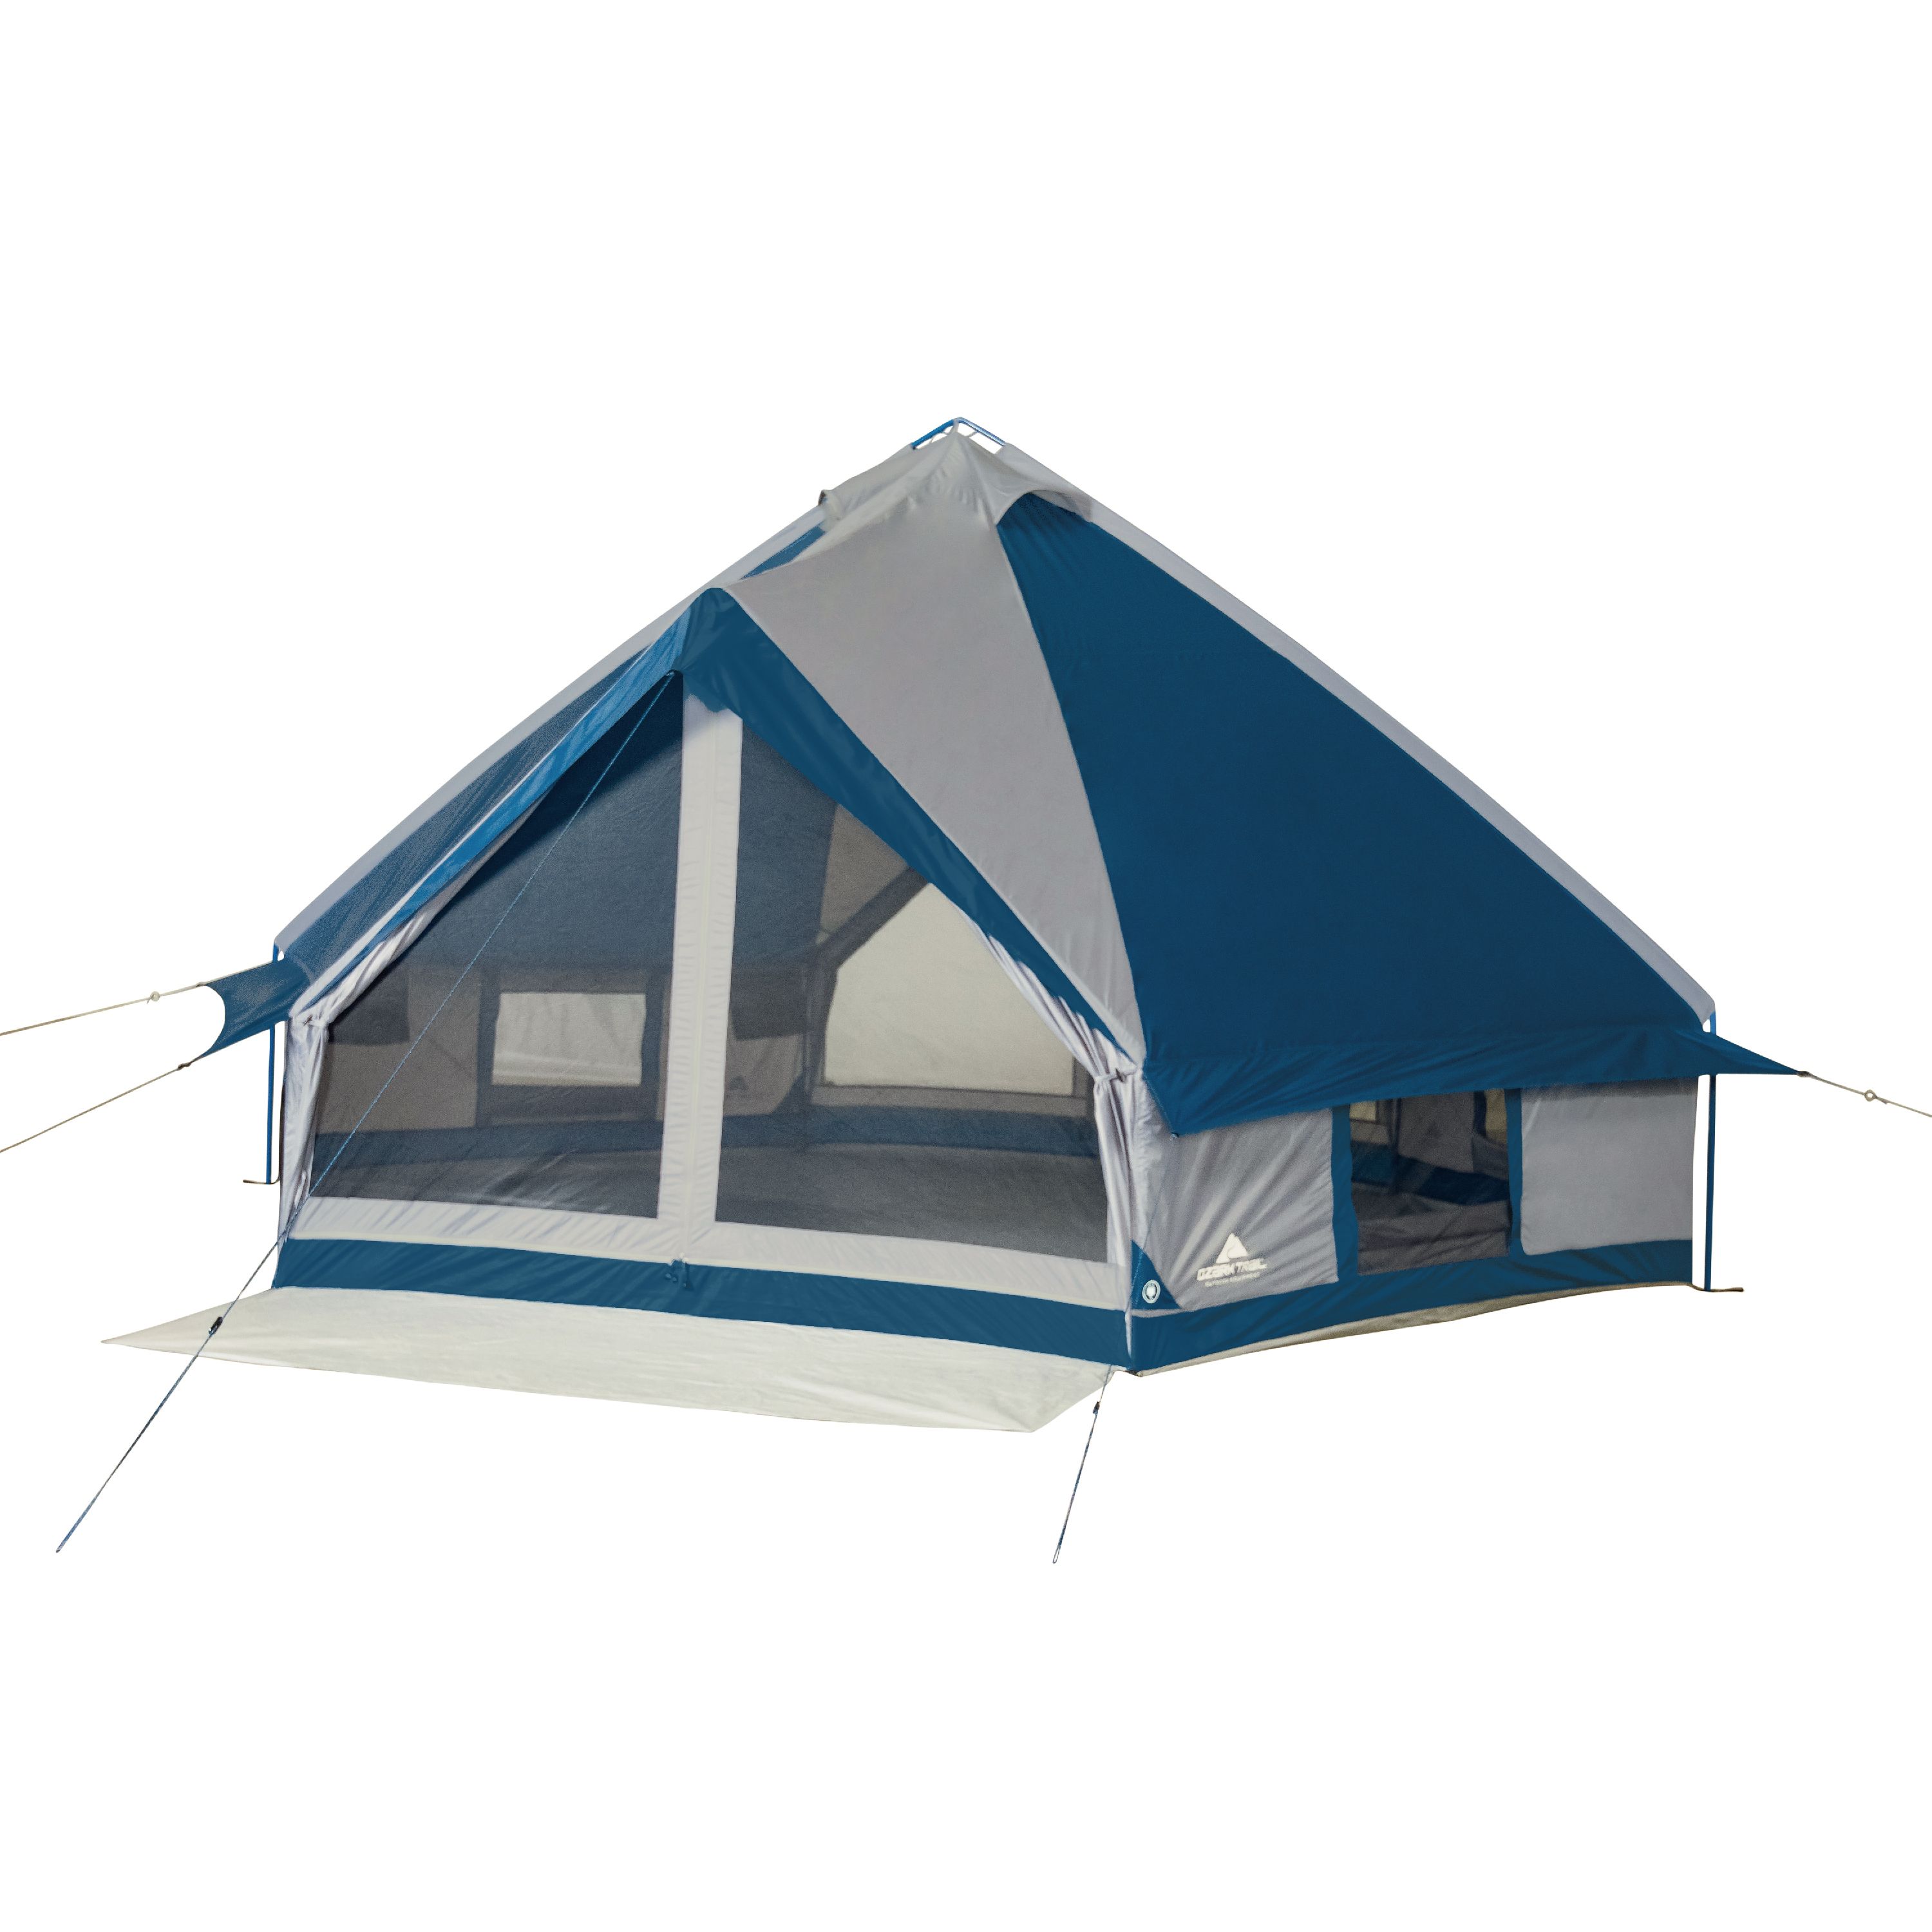 Ozark Trail Crystal Caverns 10-Person Festival Tent, with 2 Entrances - image 1 of 10